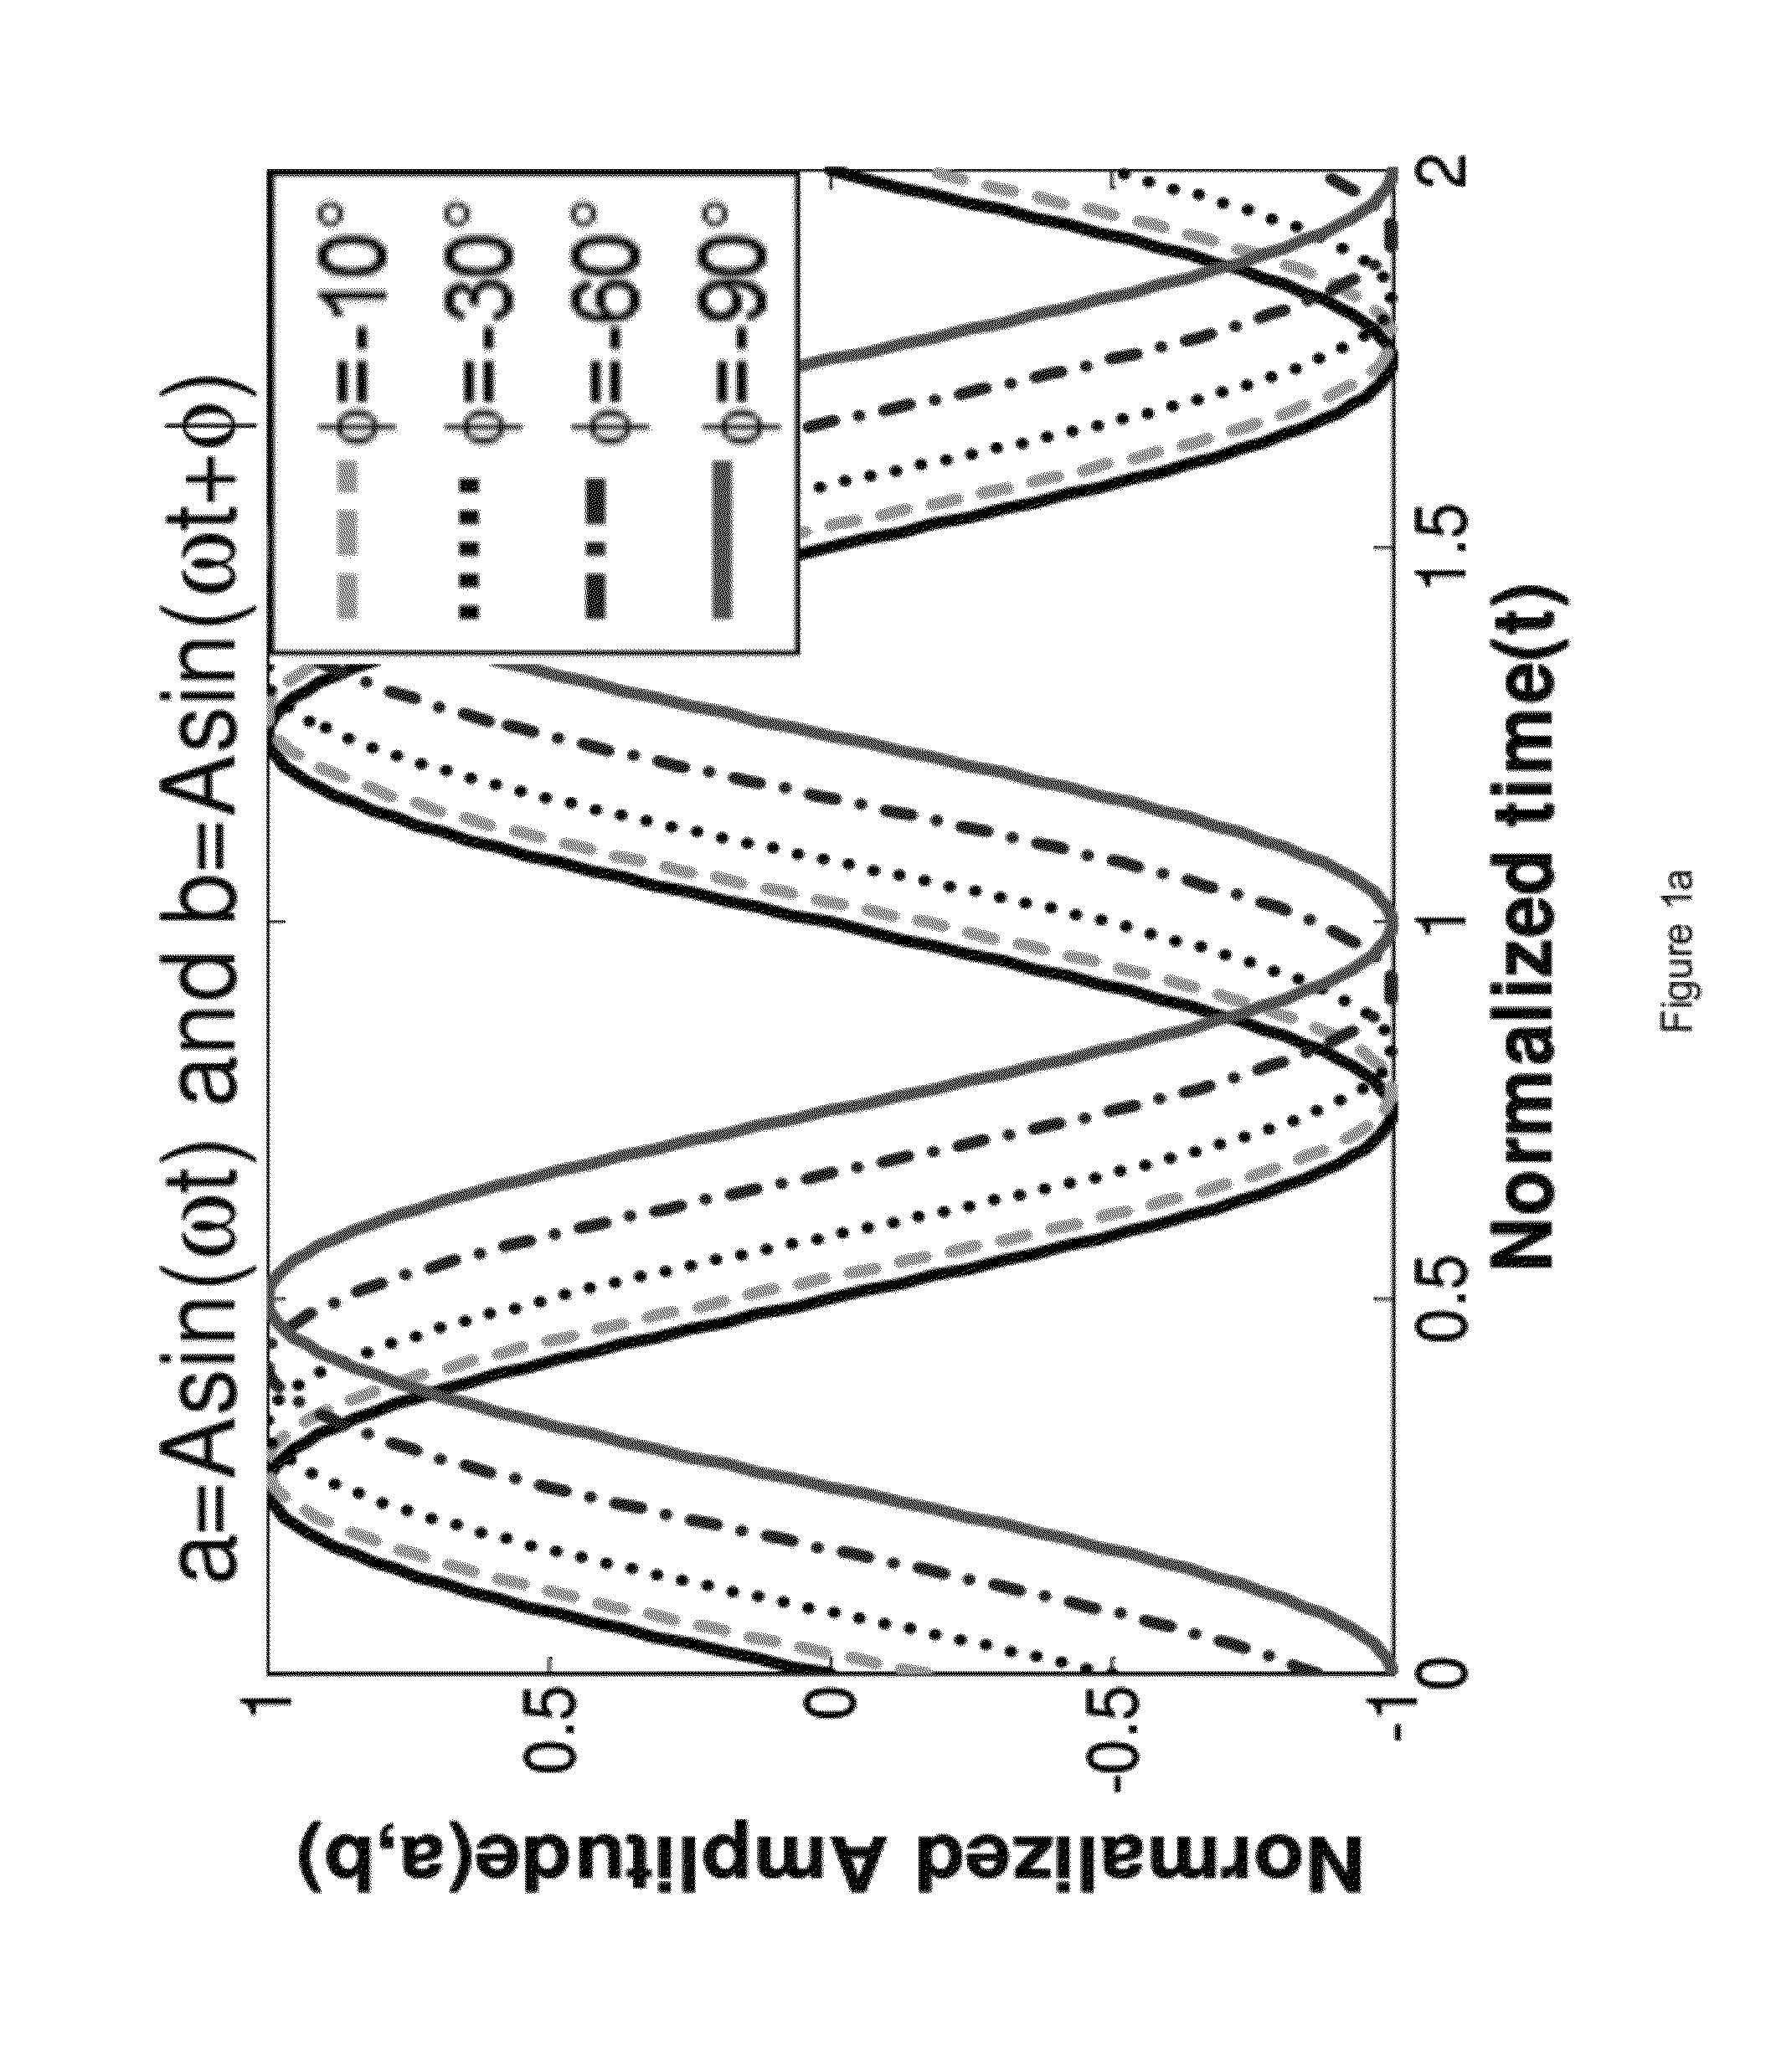 Systems and methods for distortion measurement using distortion-to-amplitude transformations